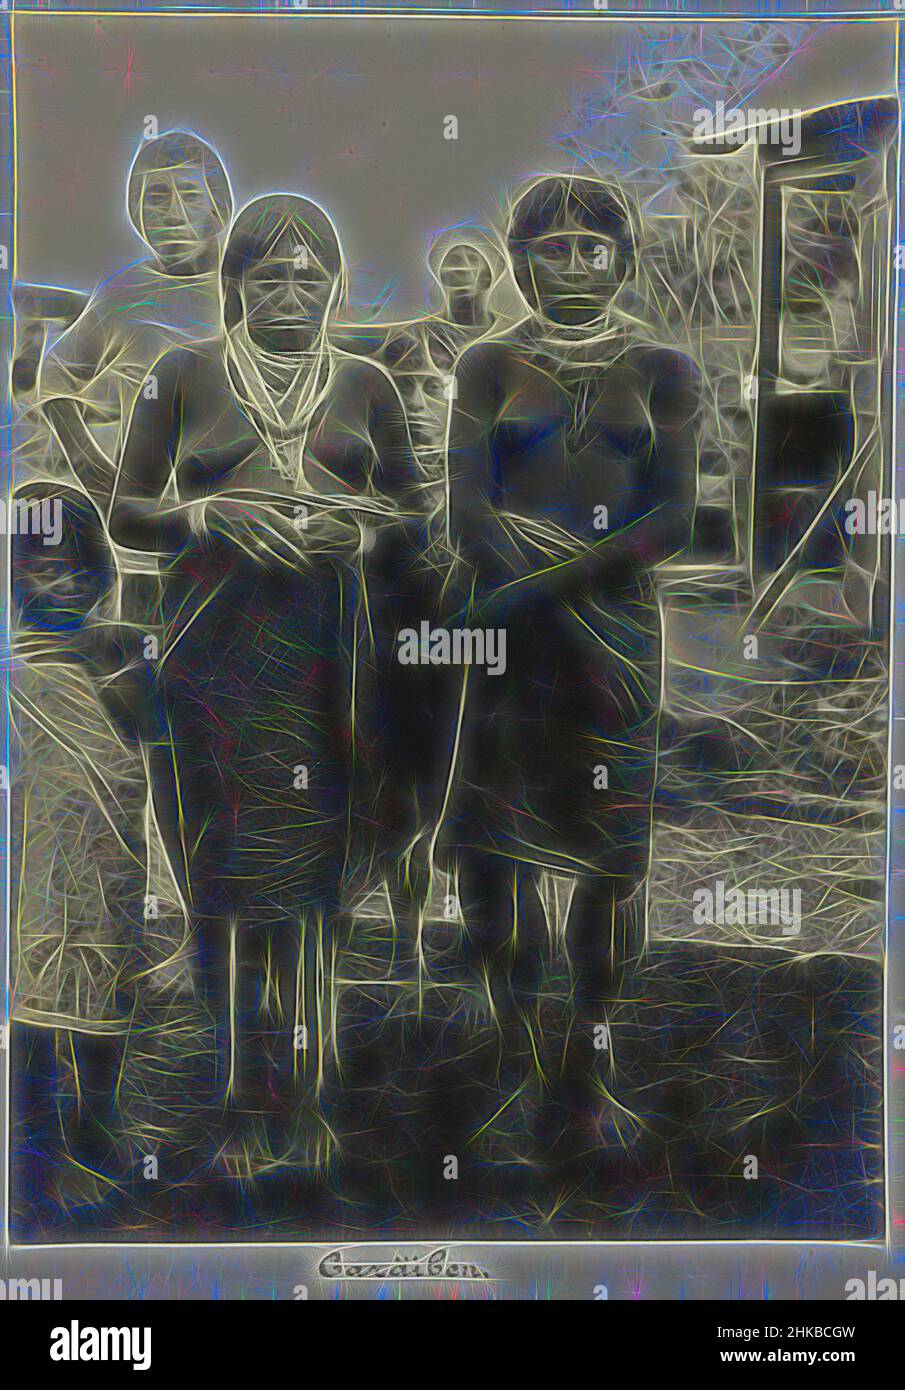 Inspired by Surinamese Caribbean, Caräiben, Two standing posing young Surinamese Caribbean women. Part of the photo album of the Doijer family, Souvenir de Voyage (part 1), in and around the plantation Ma Retraite in Suriname in the years 1906-1913., Hendrik Doijer, Suriname, 1906 - 1913, gelatin, Reimagined by Artotop. Classic art reinvented with a modern twist. Design of warm cheerful glowing of brightness and light ray radiance. Photography inspired by surrealism and futurism, embracing dynamic energy of modern technology, movement, speed and revolutionize culture Stock Photo